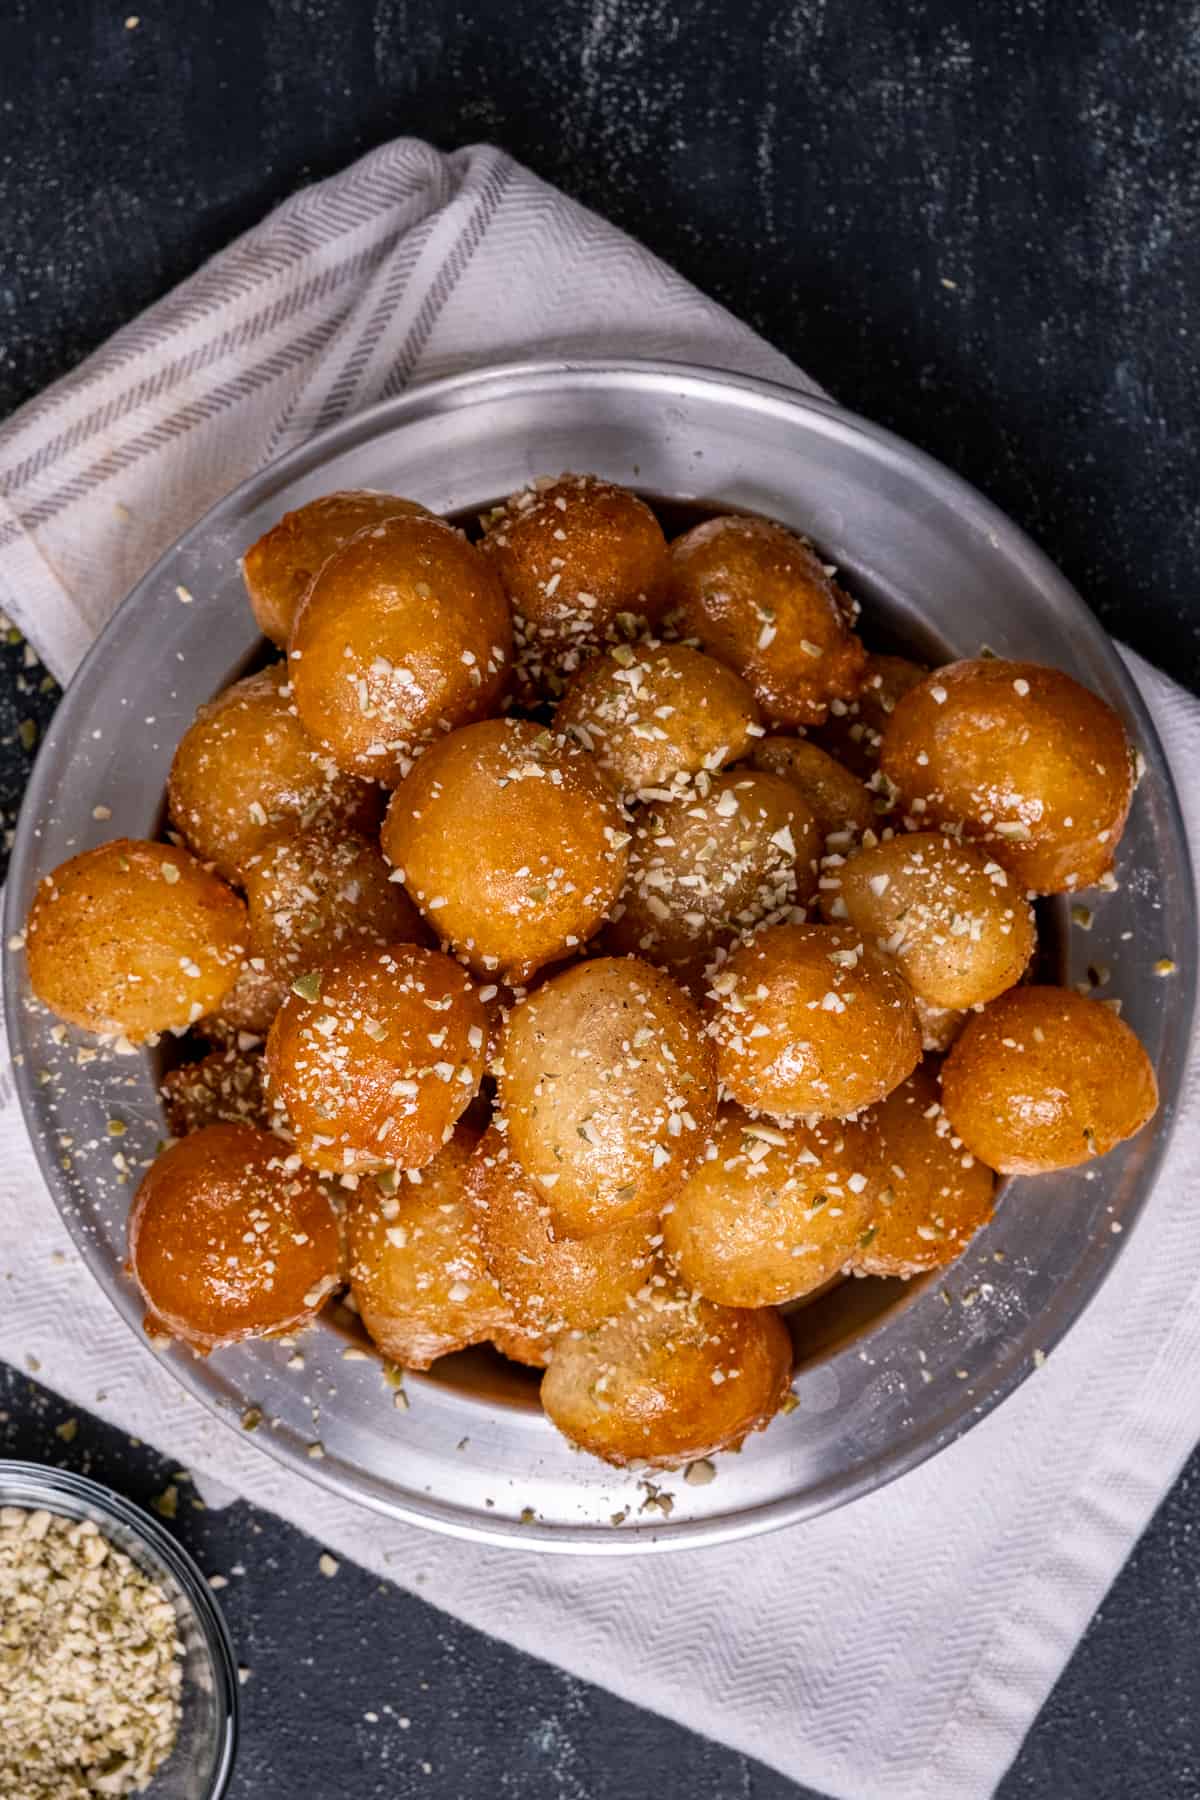 Turkish sweet fried dough balls sprinkled with ground walnuts. on a grey plate